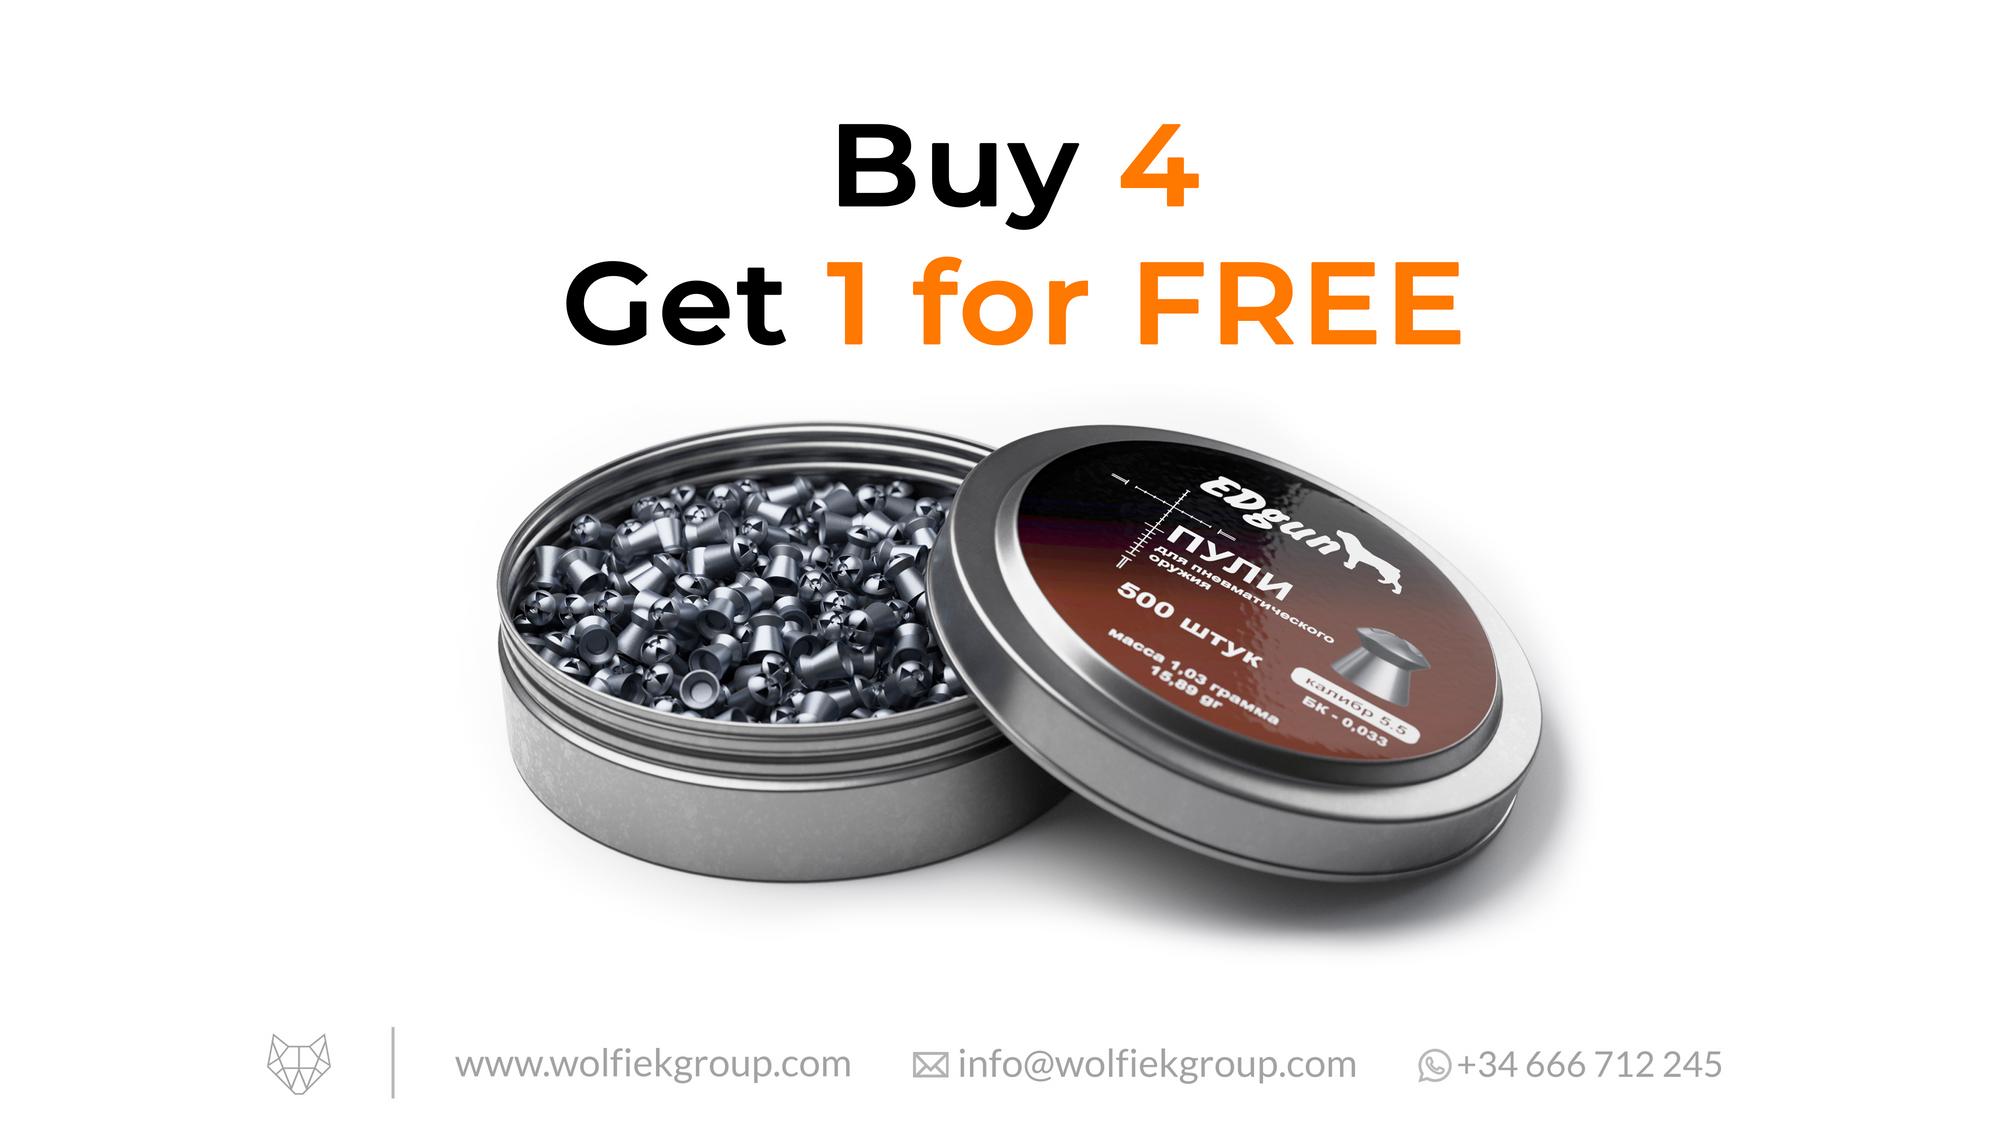 EDgun Hades Pellets Cal .22 (5,52mm) Weight 1,03g (15,89gr) with text buy 4 get 1 for free